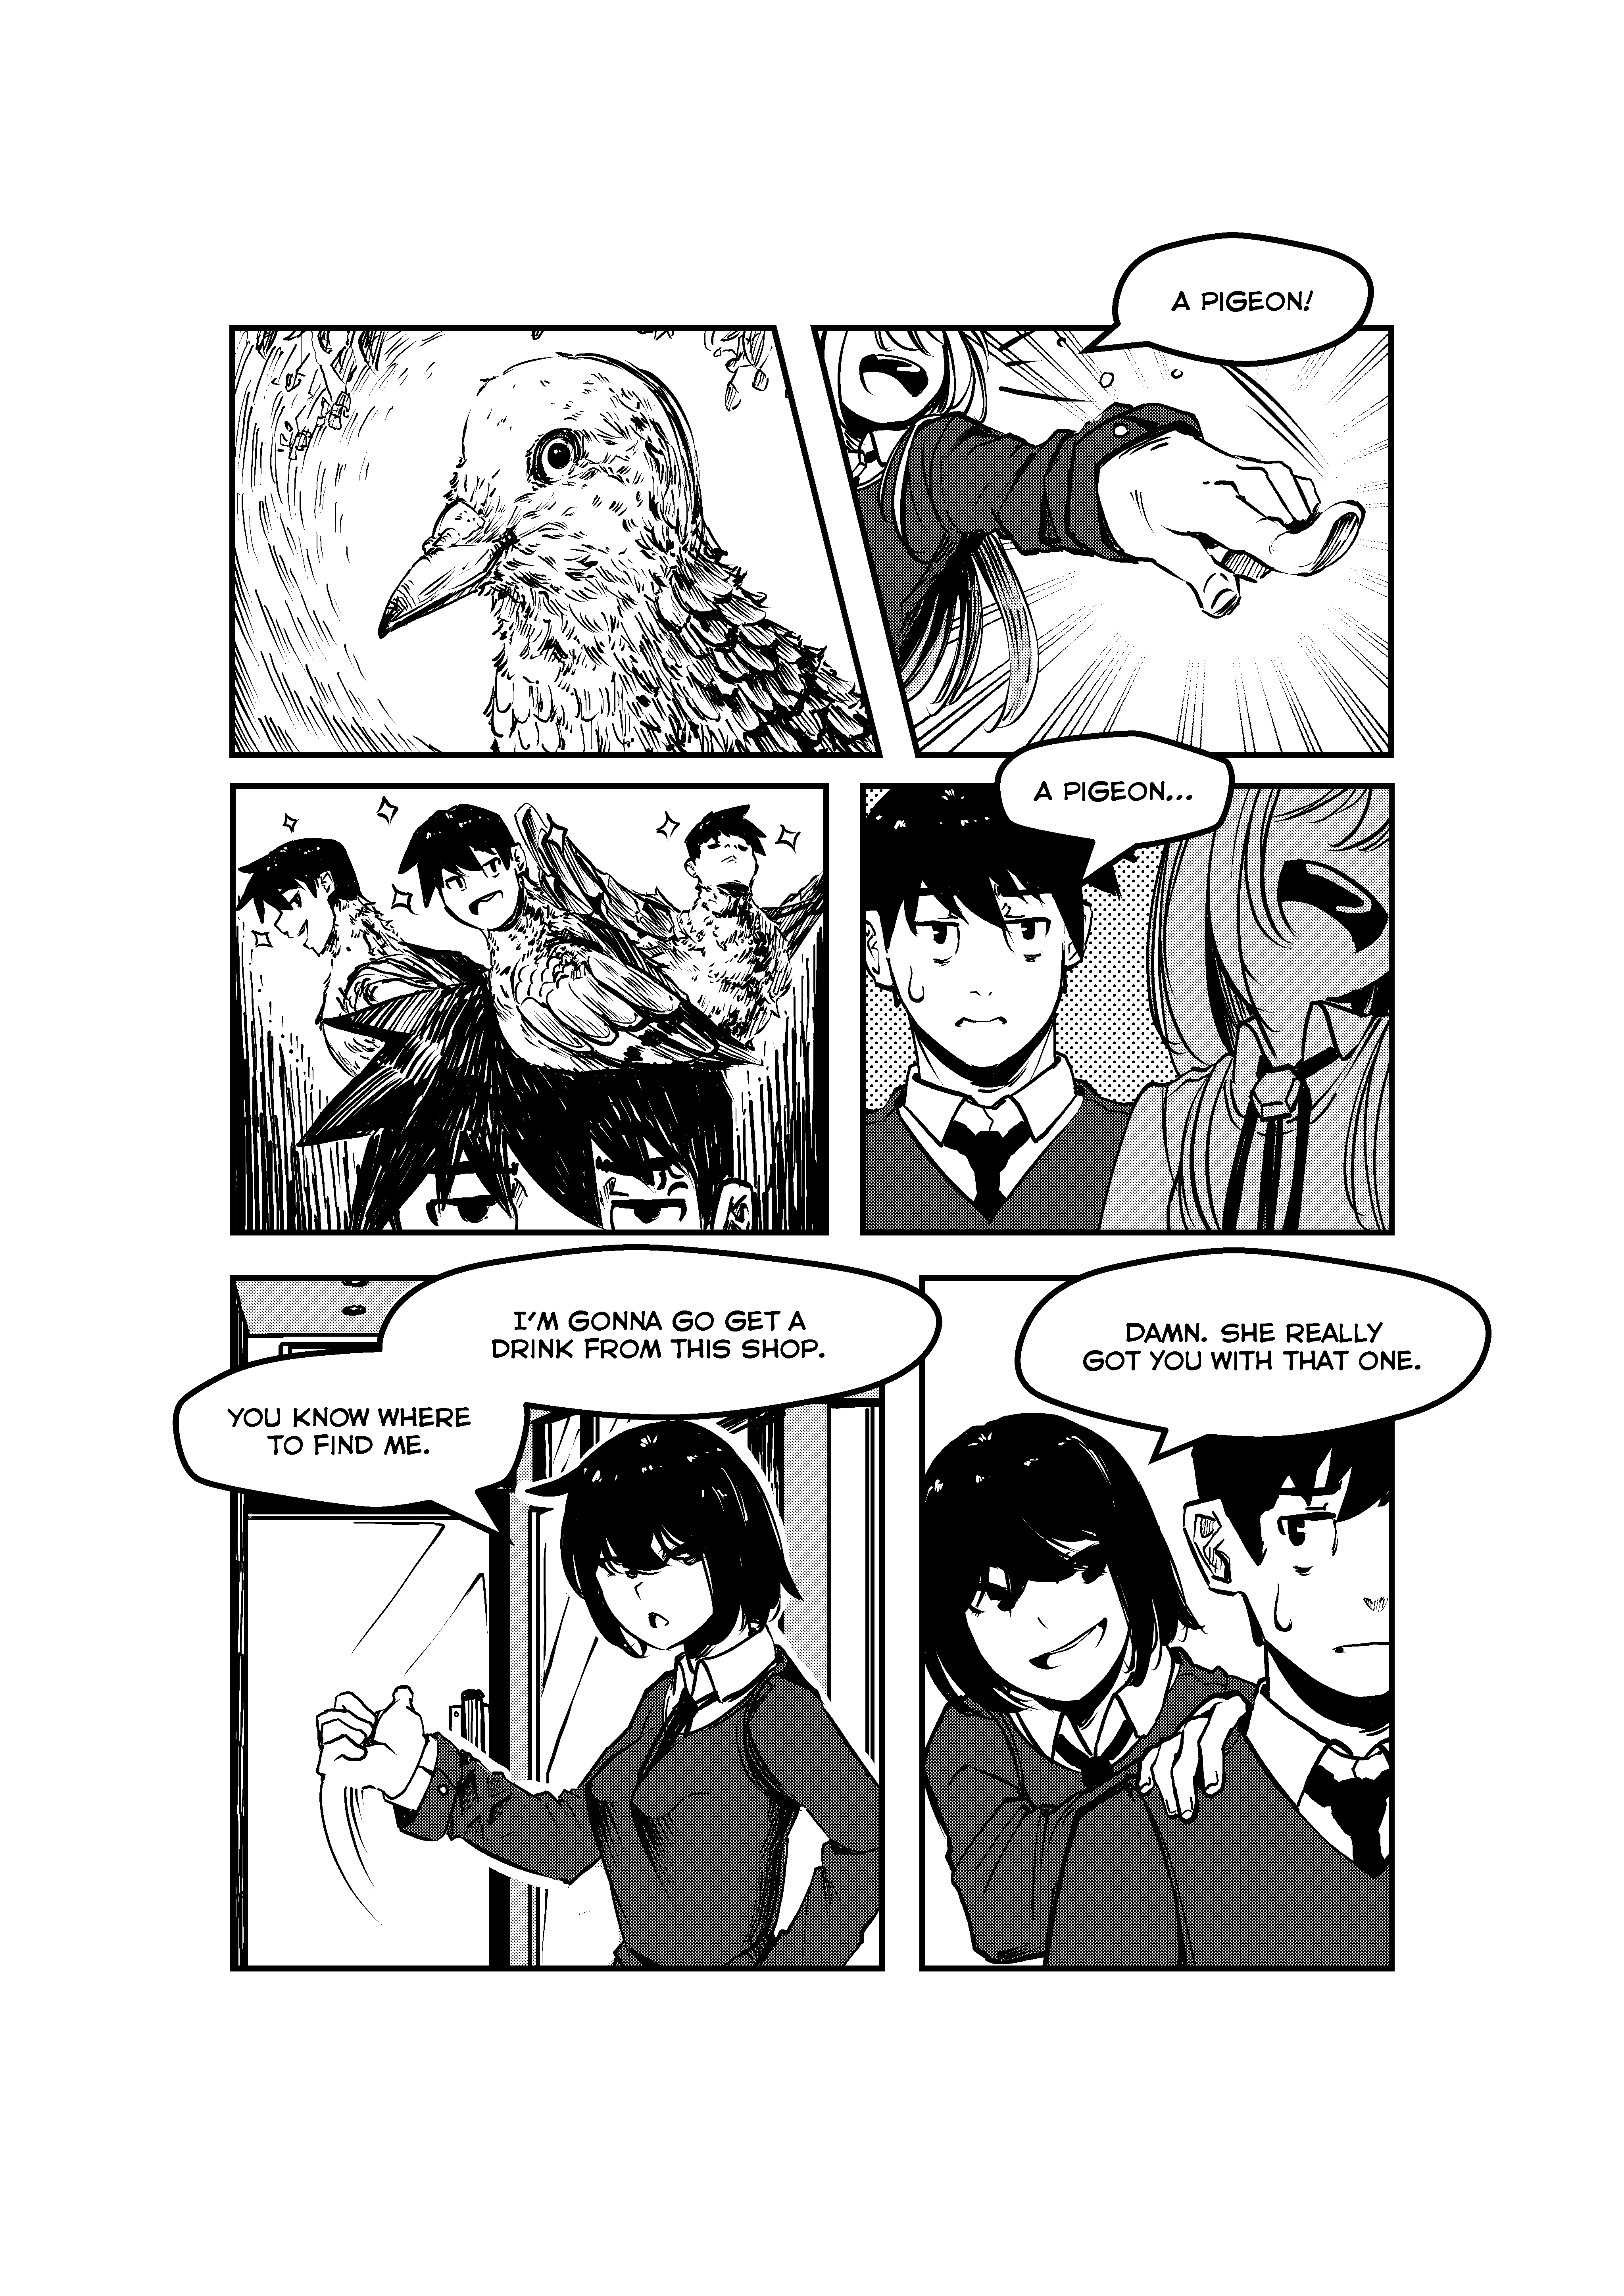 Opposites In Disguise - 20 page 33-e5c5f078